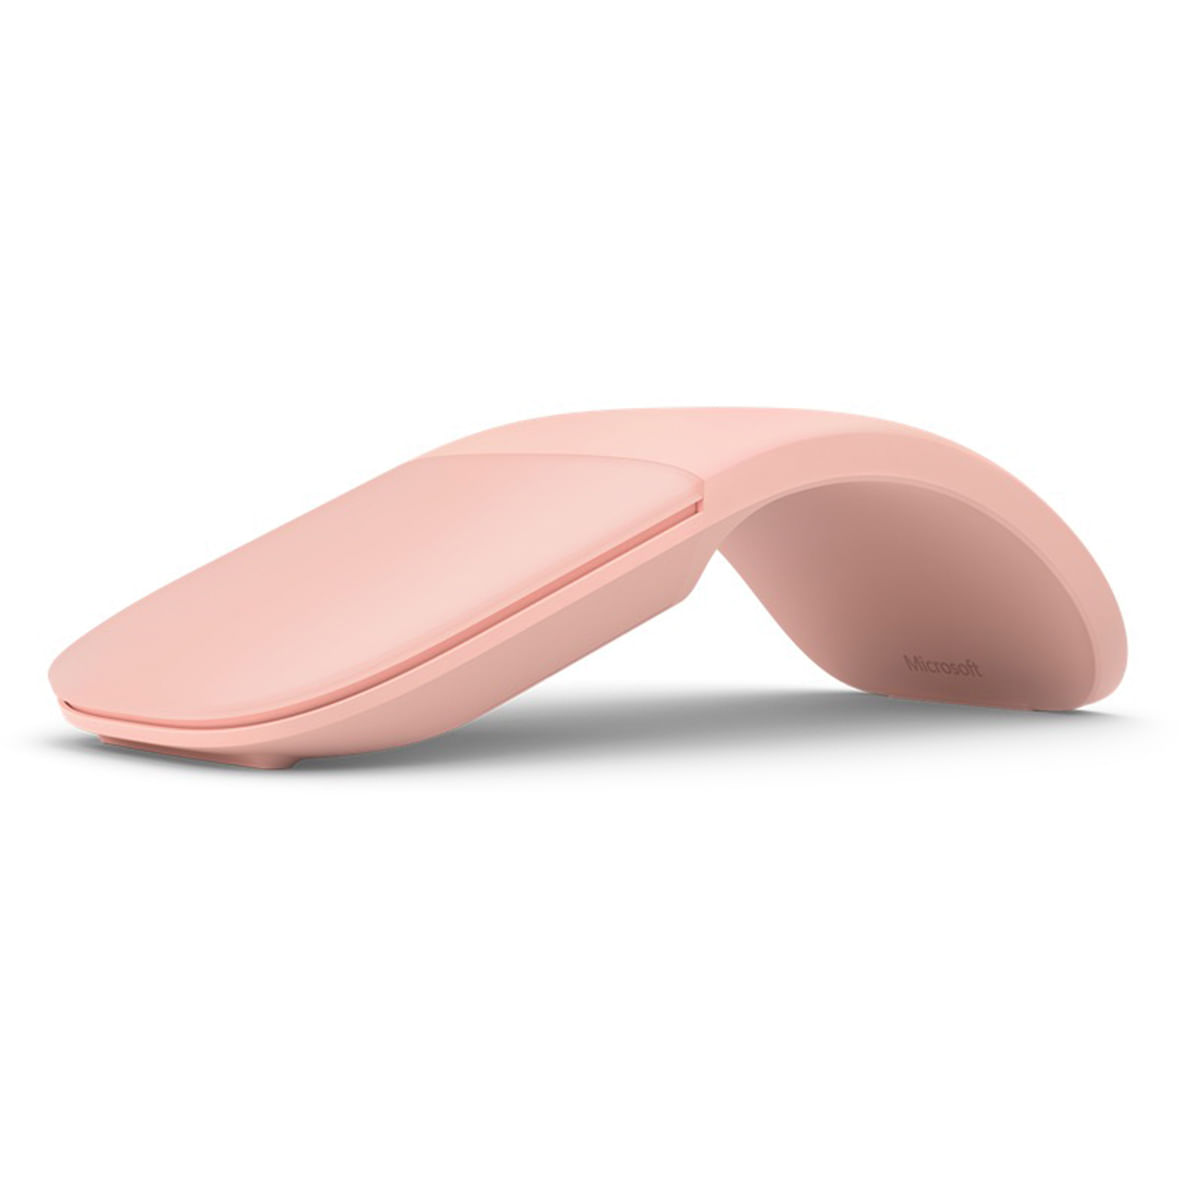 Mouse Microsoft Surface Arc Bluetooth 5.0 Soft Pink - ELG-00037